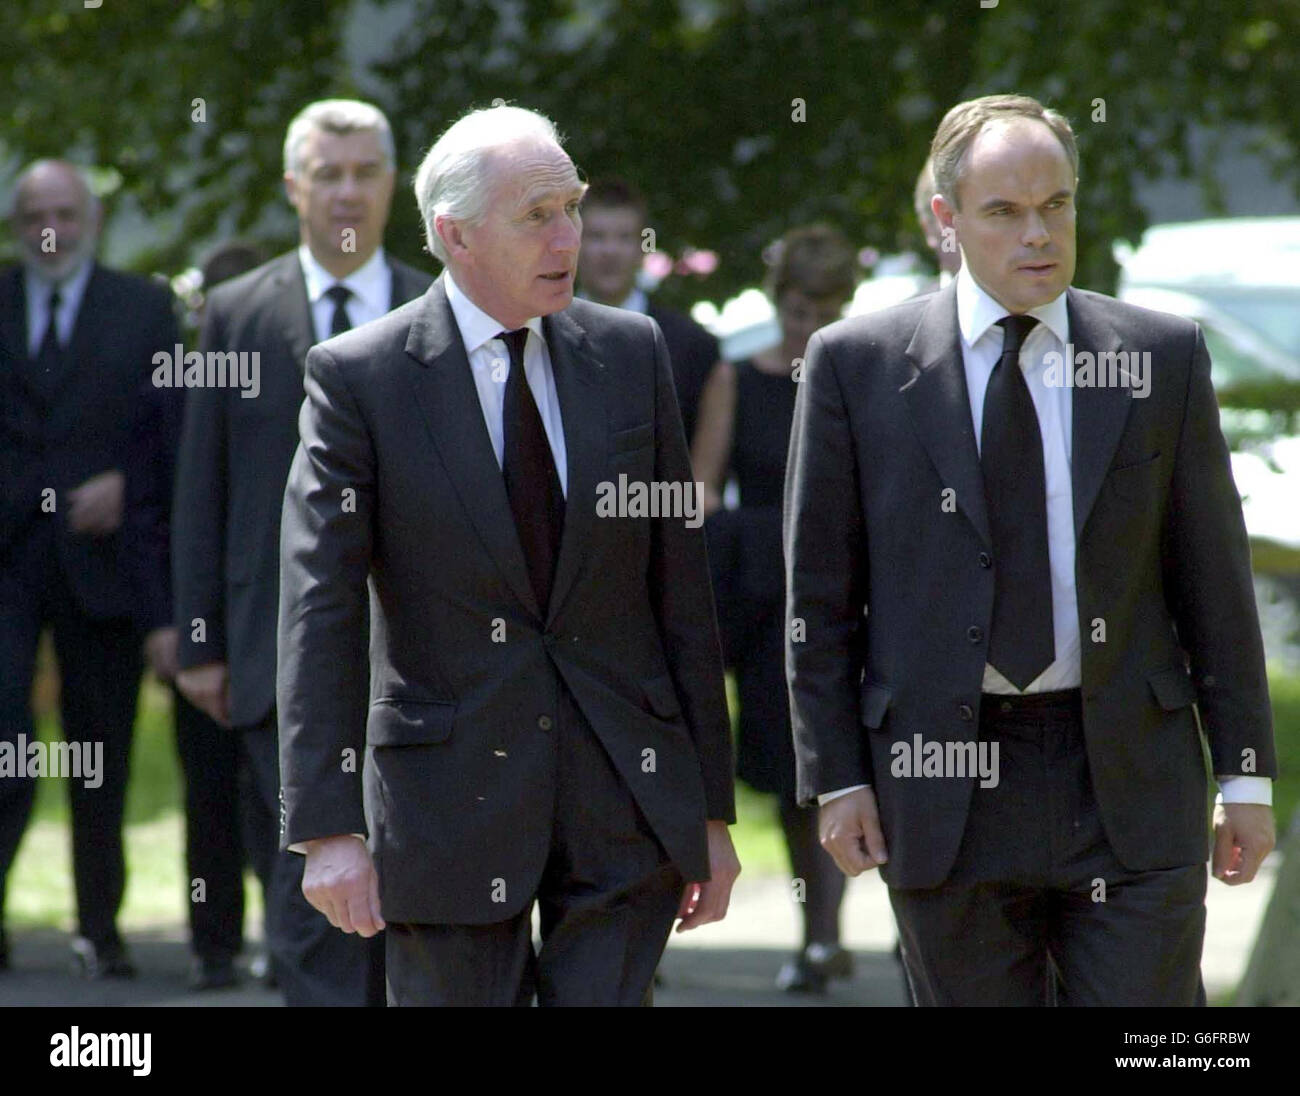 Lord Hutton (left) arrives at St Mary's Church in Longworth, Oxfordshire for the funeral of Government weapons expert Dr David Kelly. The private funeral for Dr Kelly is being held overlooking the spot where he apparently committed suicide. Stock Photo